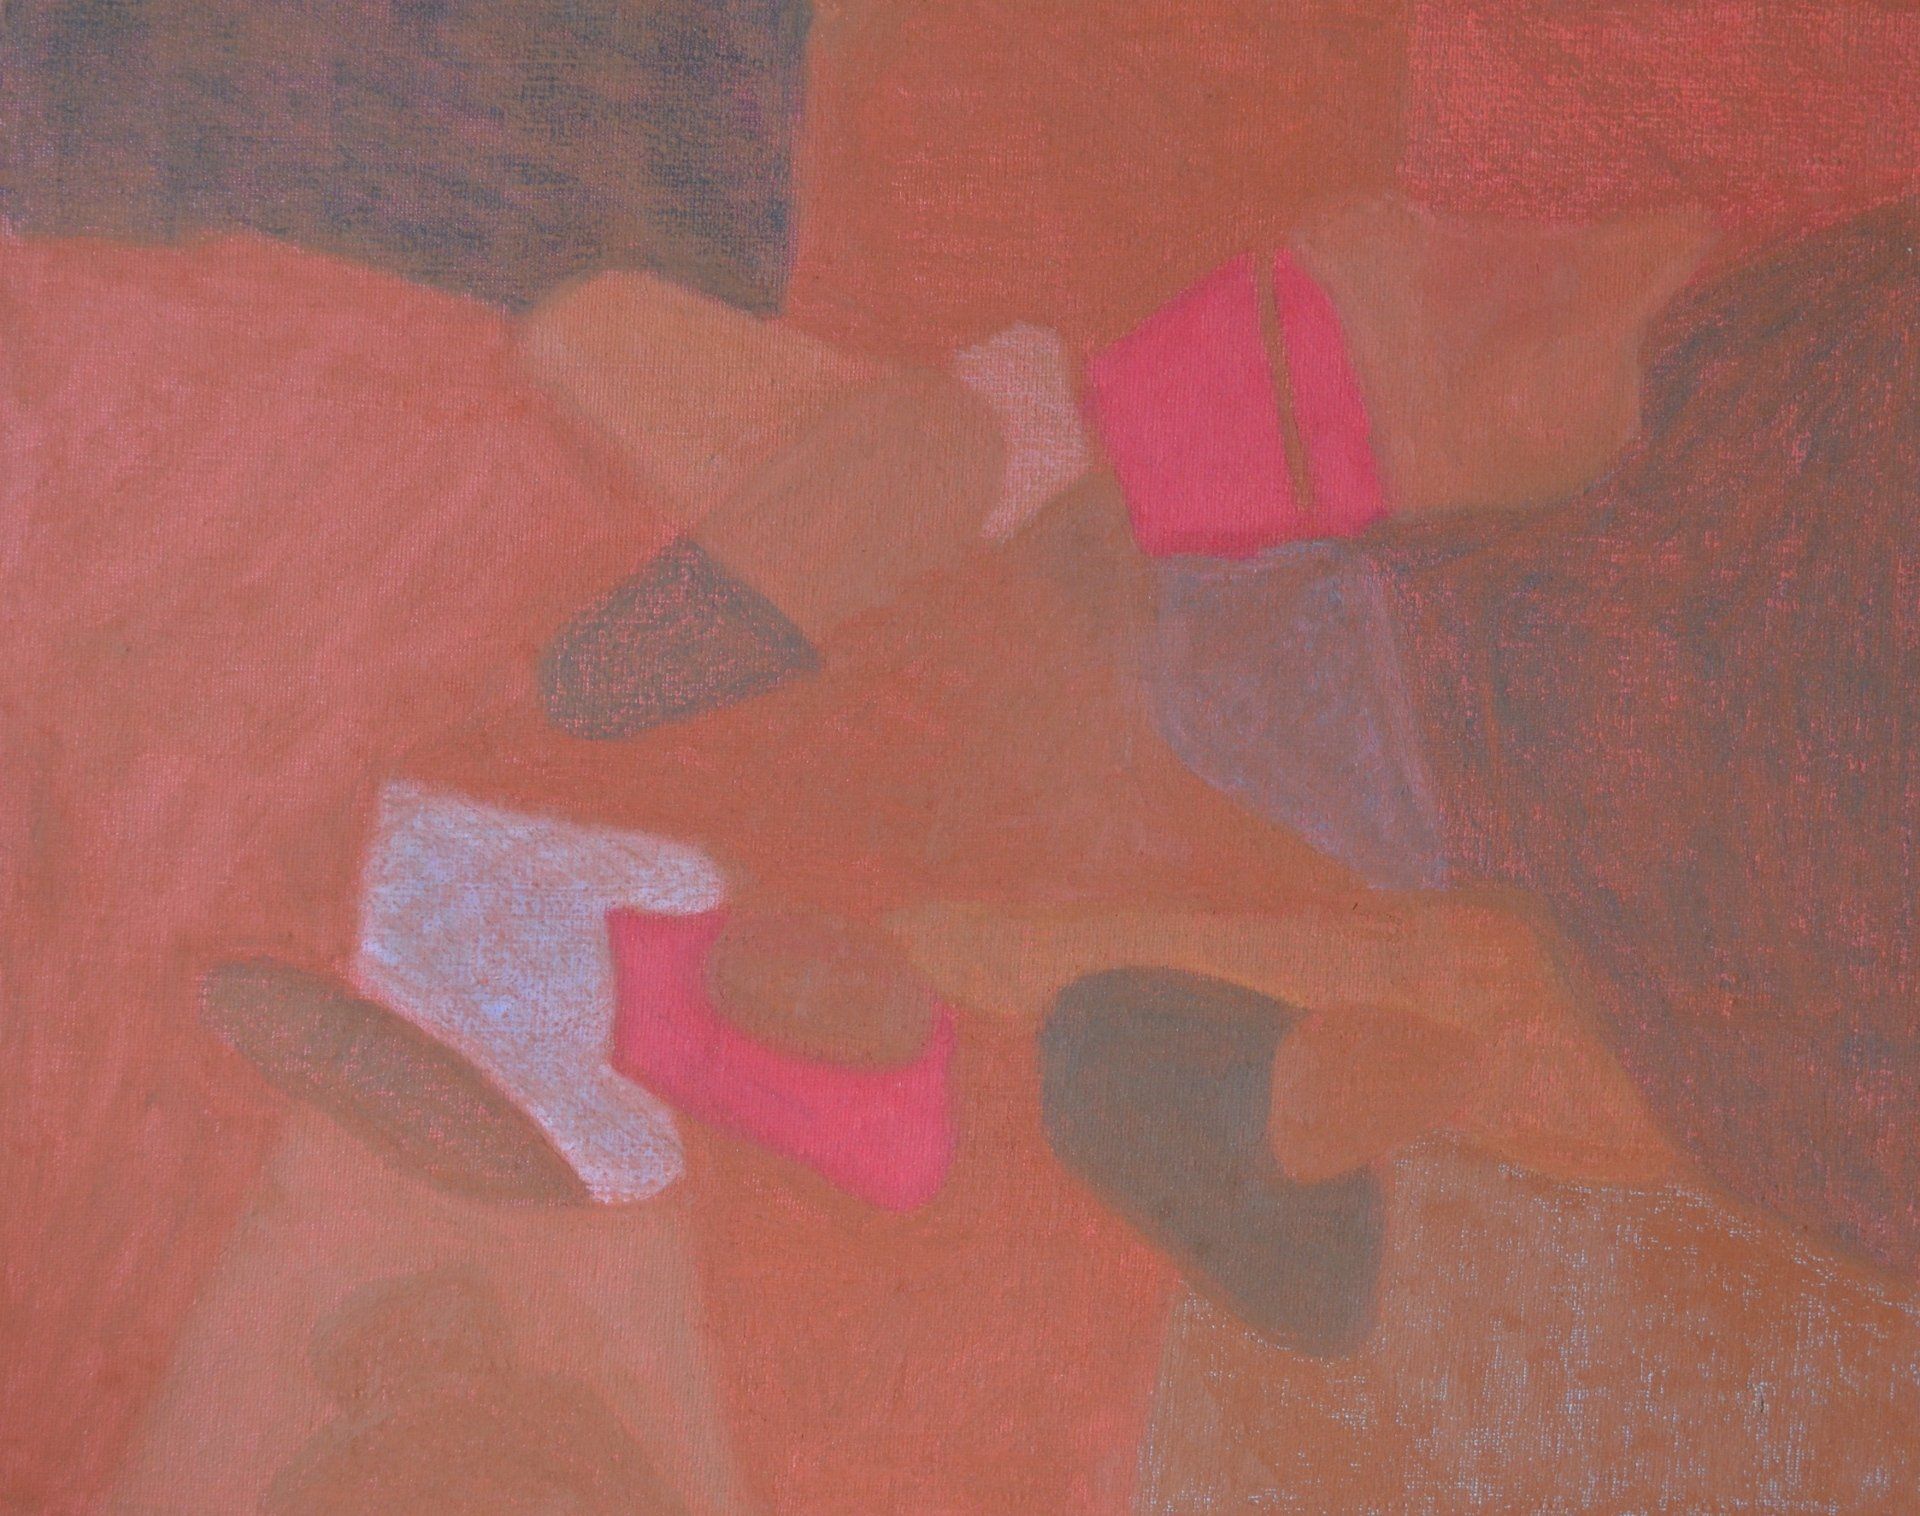 Siobhan McLaughlin’s abstract and colourful oil pastel paintings in reds, pinks and oranges